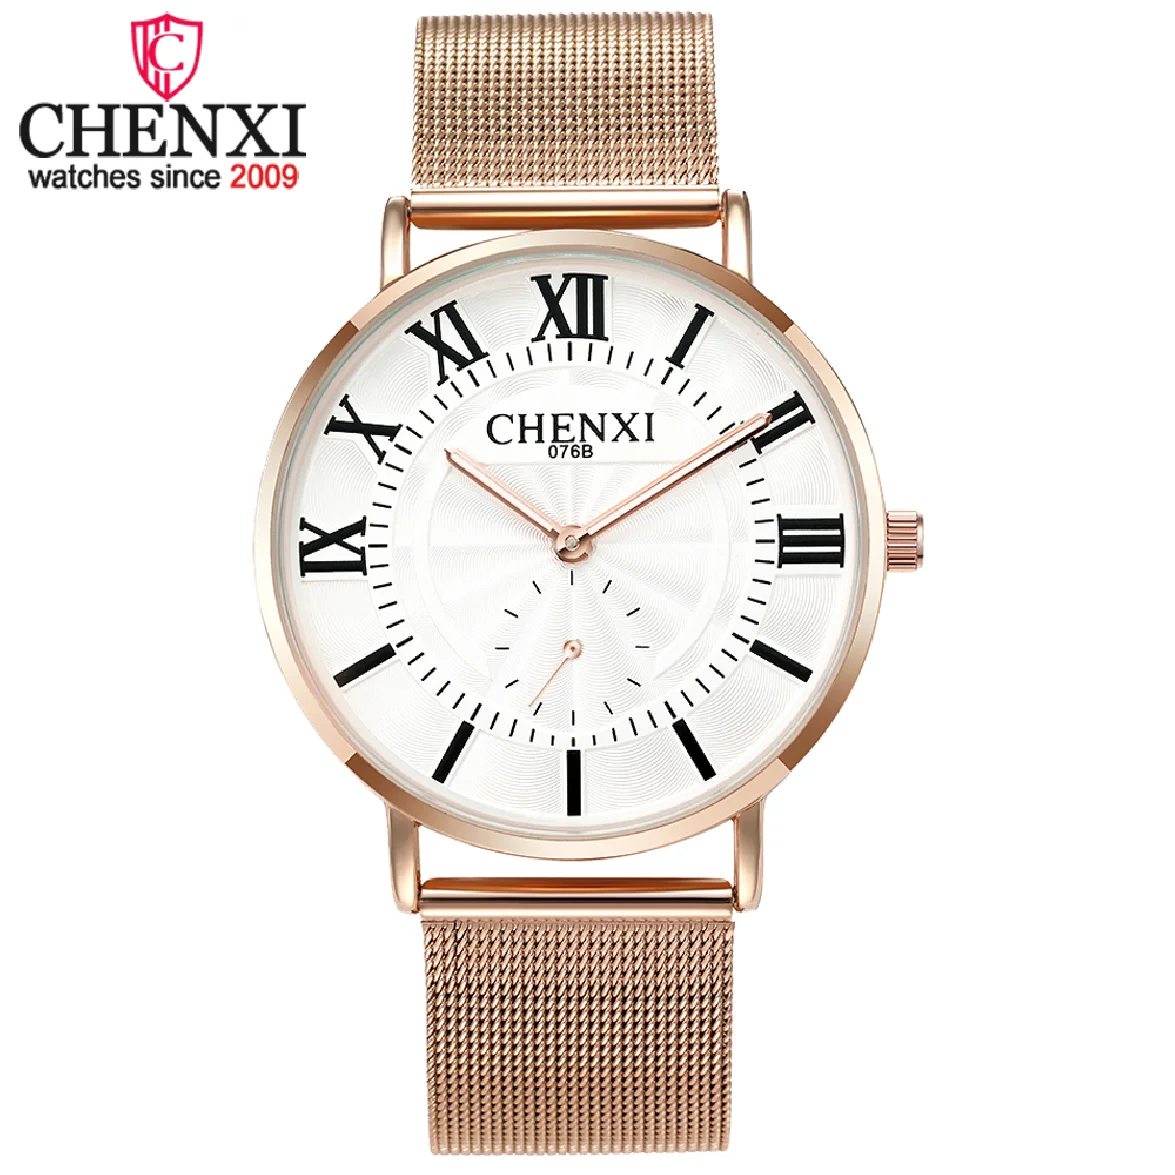 2022 Roman Numerals Luxury Women's Watches With Rosegold Steel Band Classic Ladies Wristwatches Fashion Accessories for Women